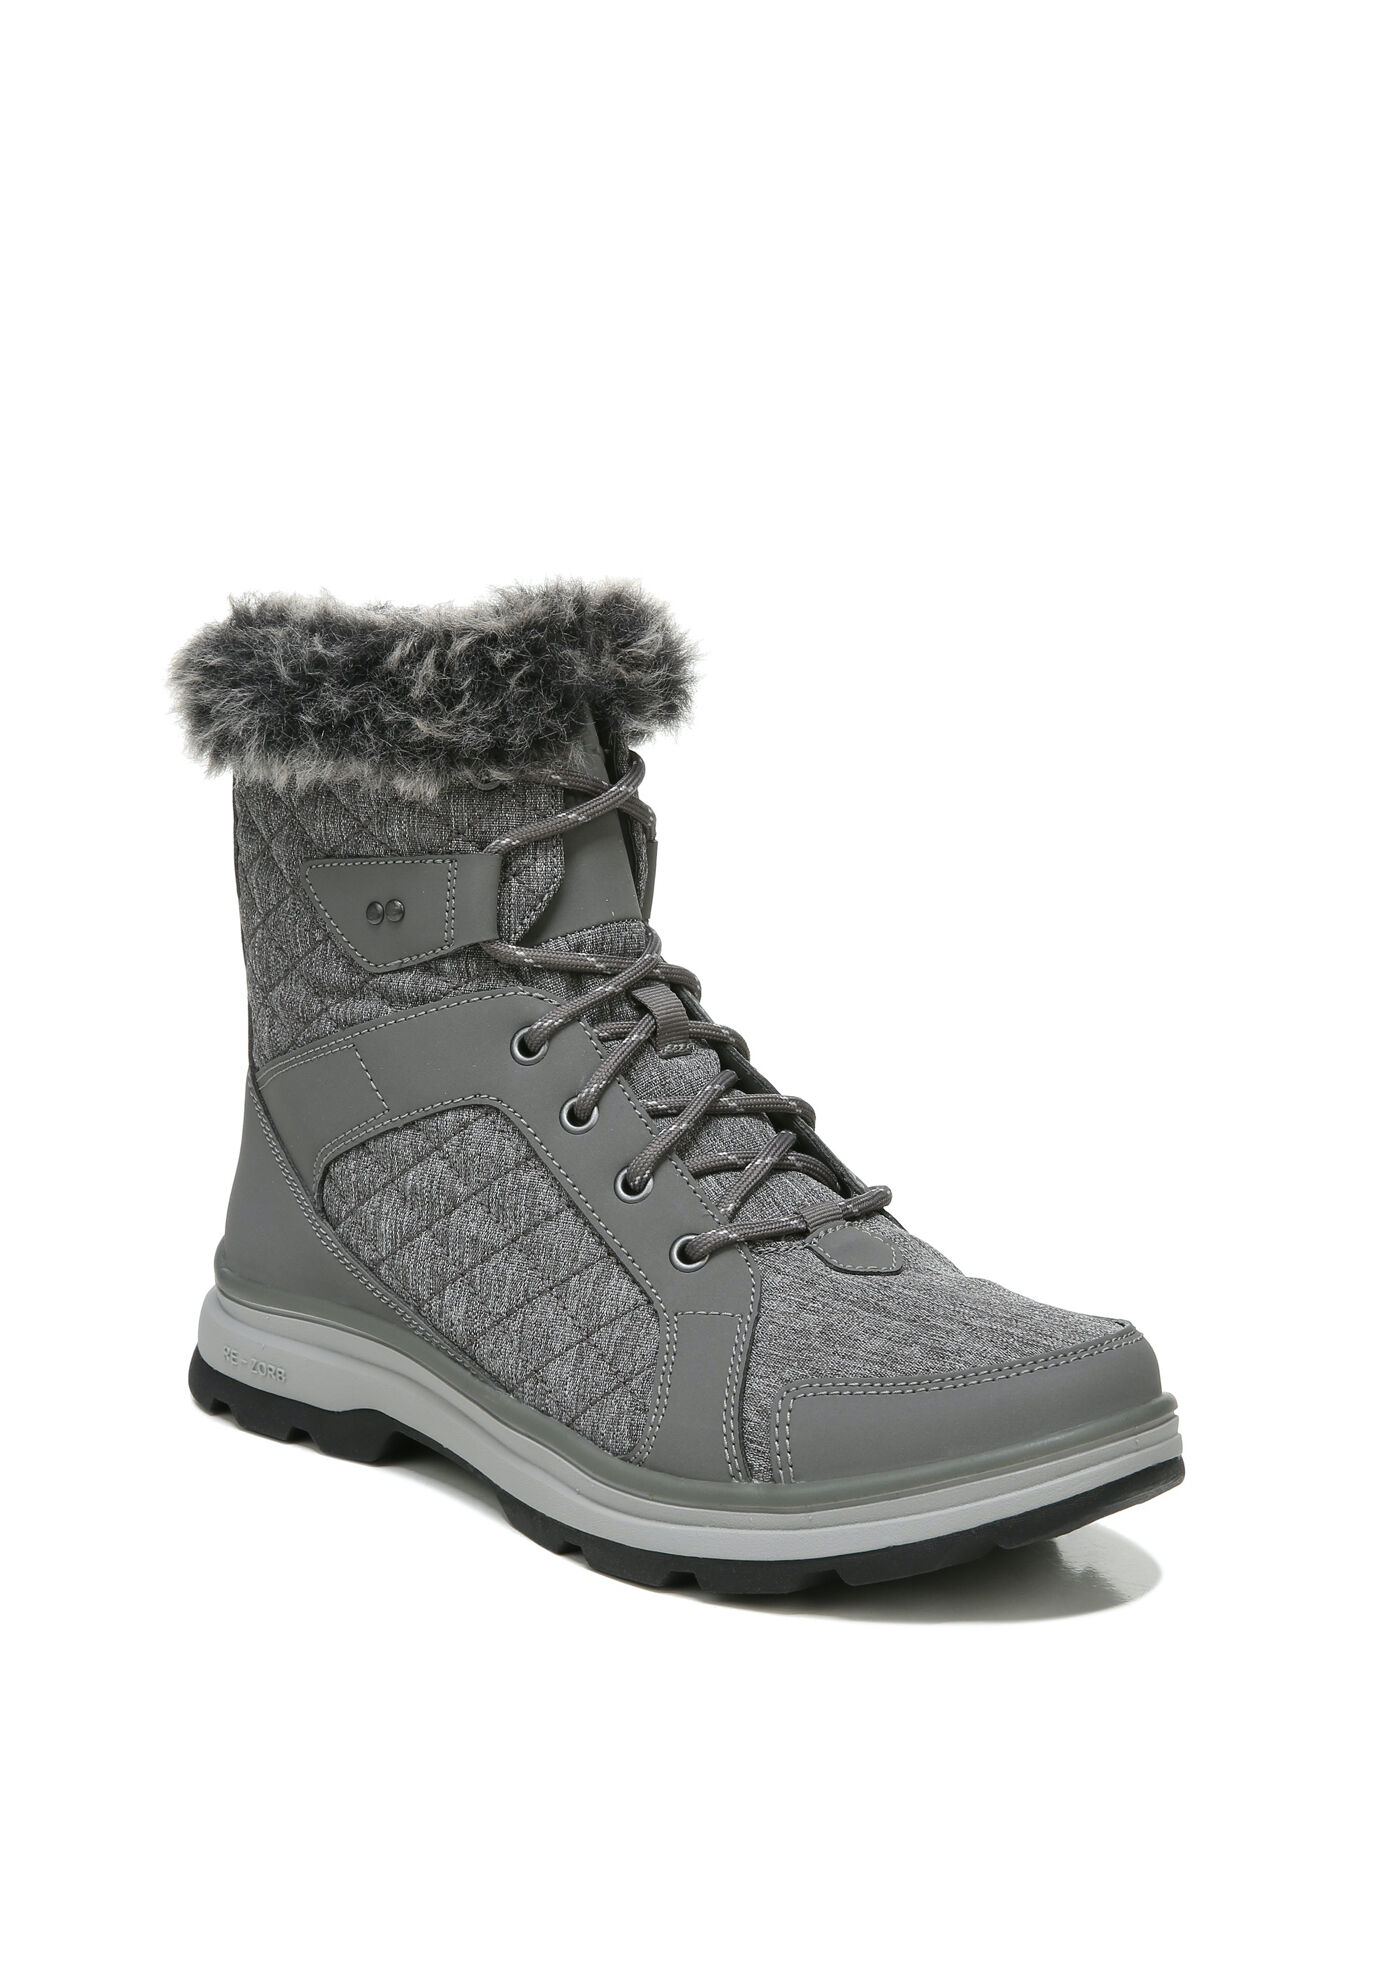 Wide Width Women's Brisk Water Repellent Hiking Boot by Ryka in Charcoal Grey (Size 7 1/2 W)